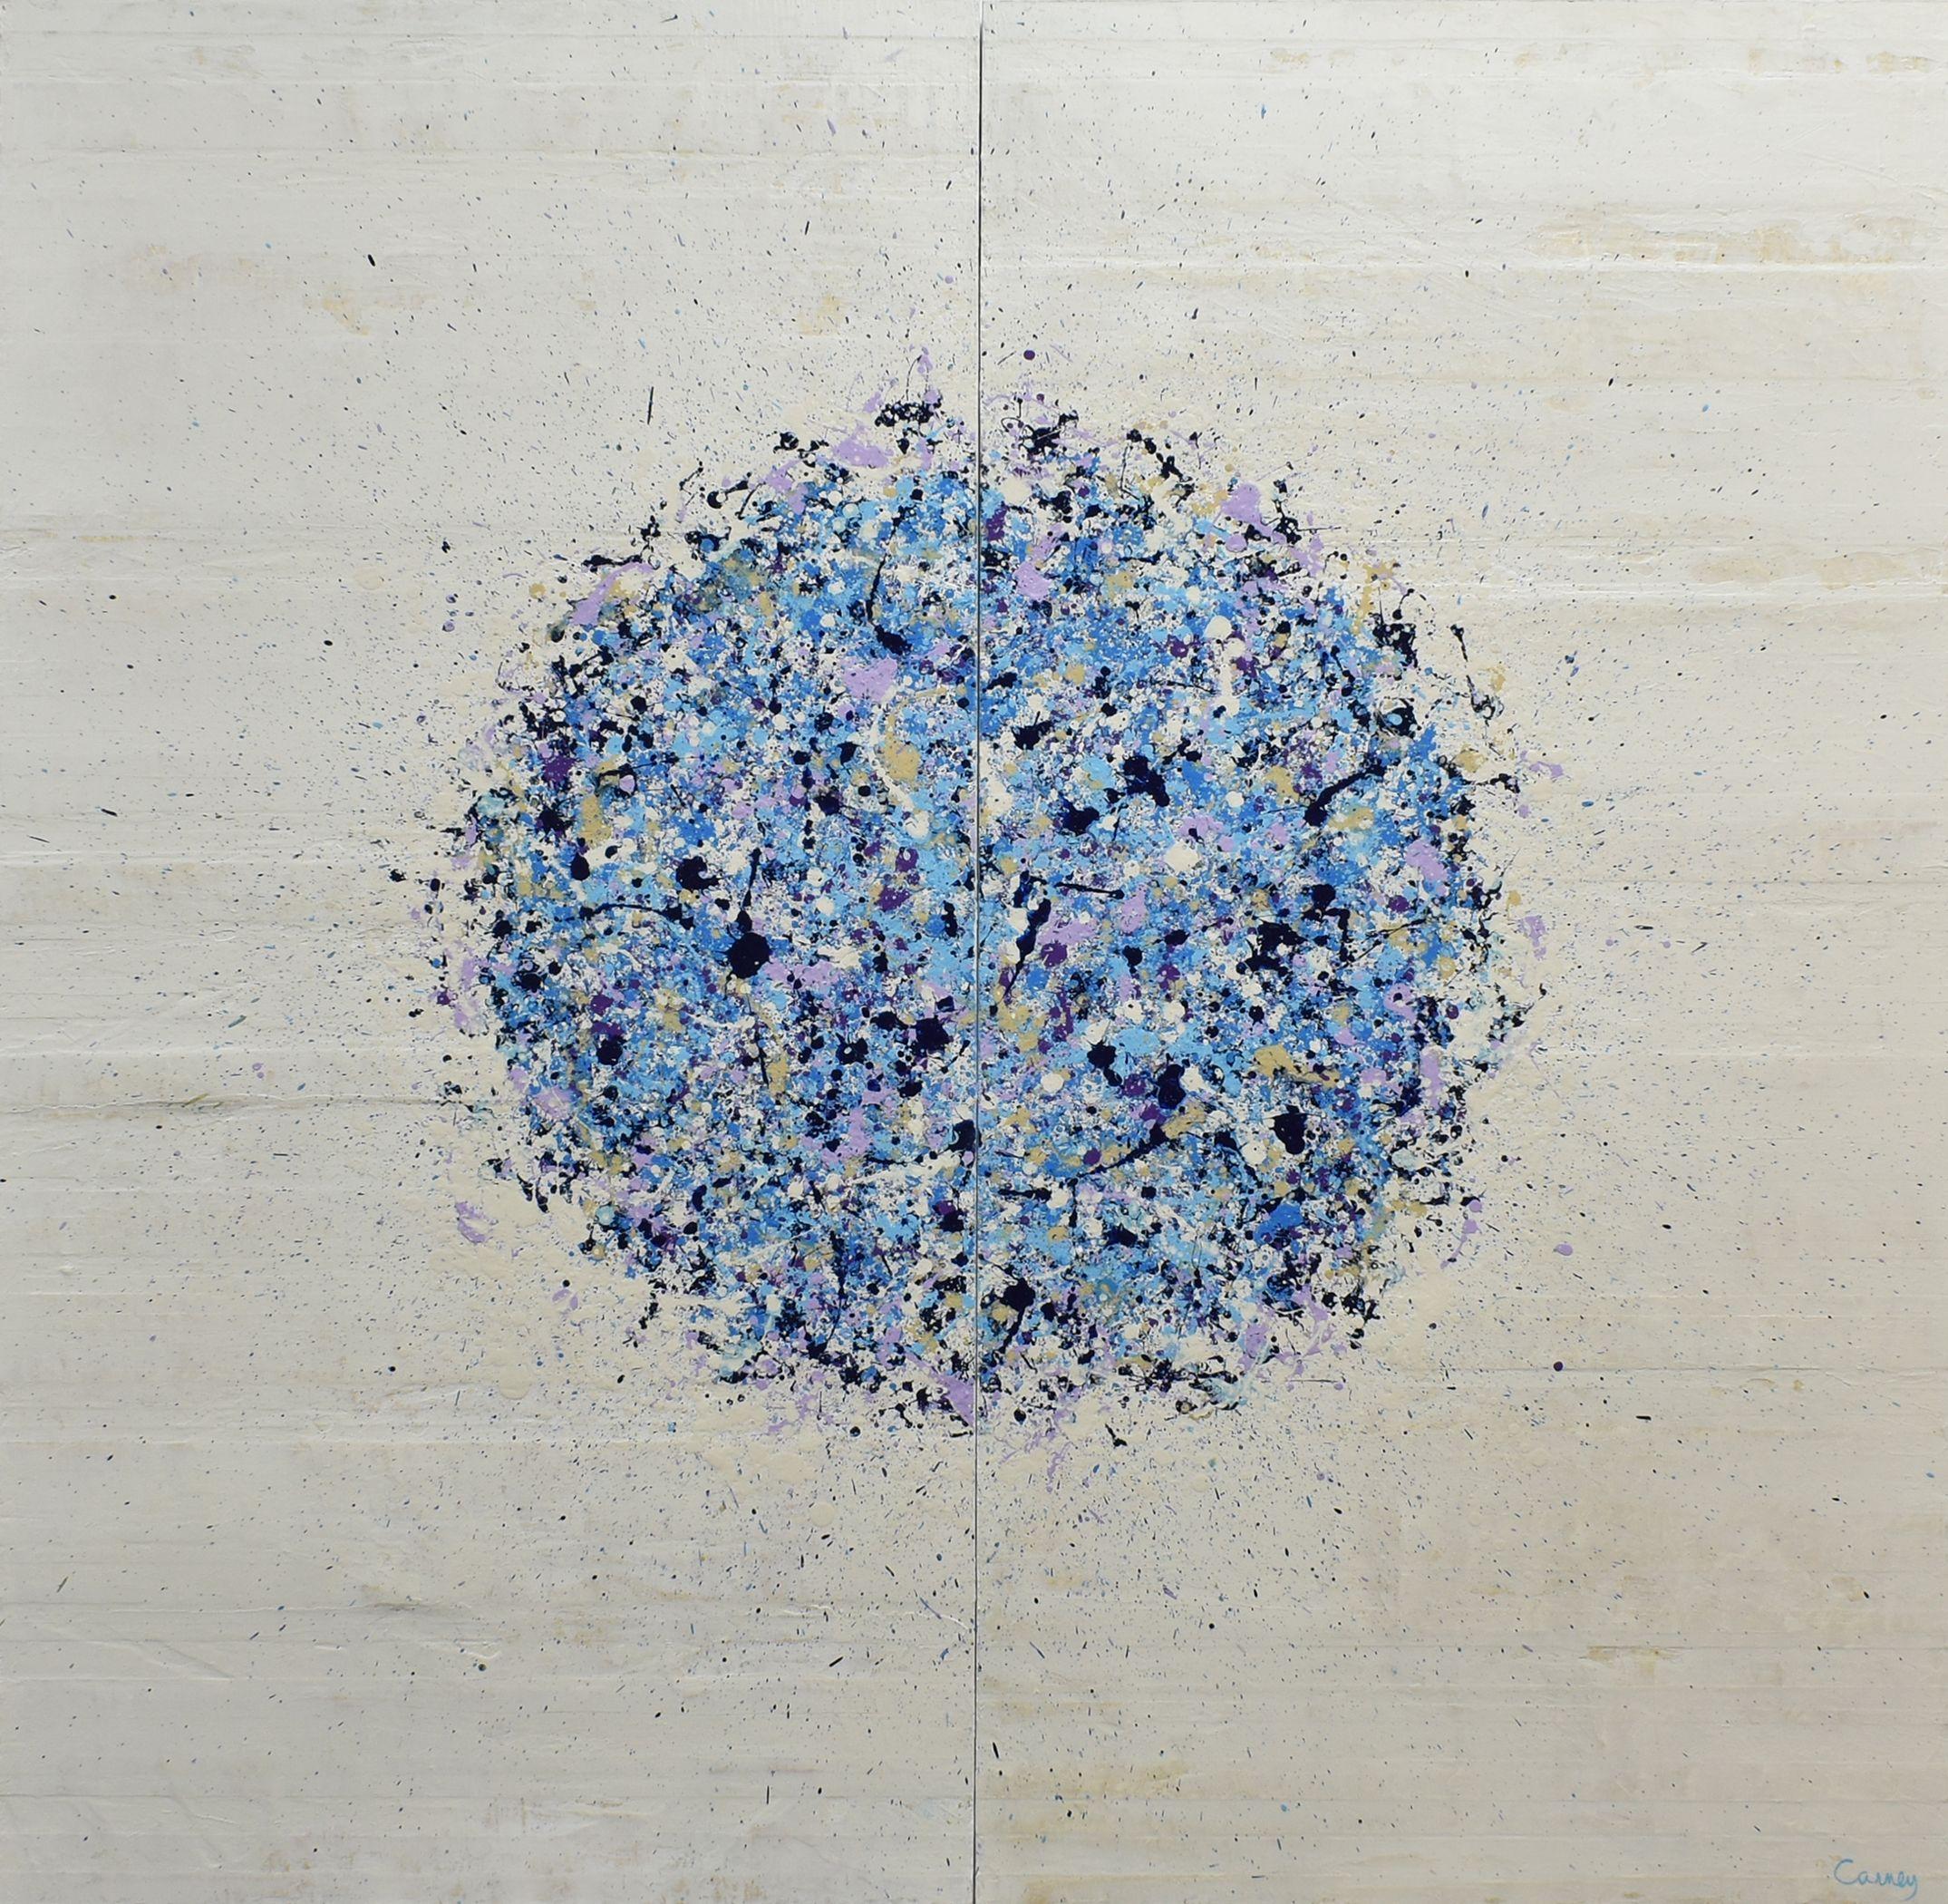 Petal Burst 36 is an abstract diptych, meaning it is made up of two separate paintings. It was painted with acrylic on wood panel with a cool palette of blues on a bone white background. Each panel measures 48 x 24 x 1.5 inches. The total size of